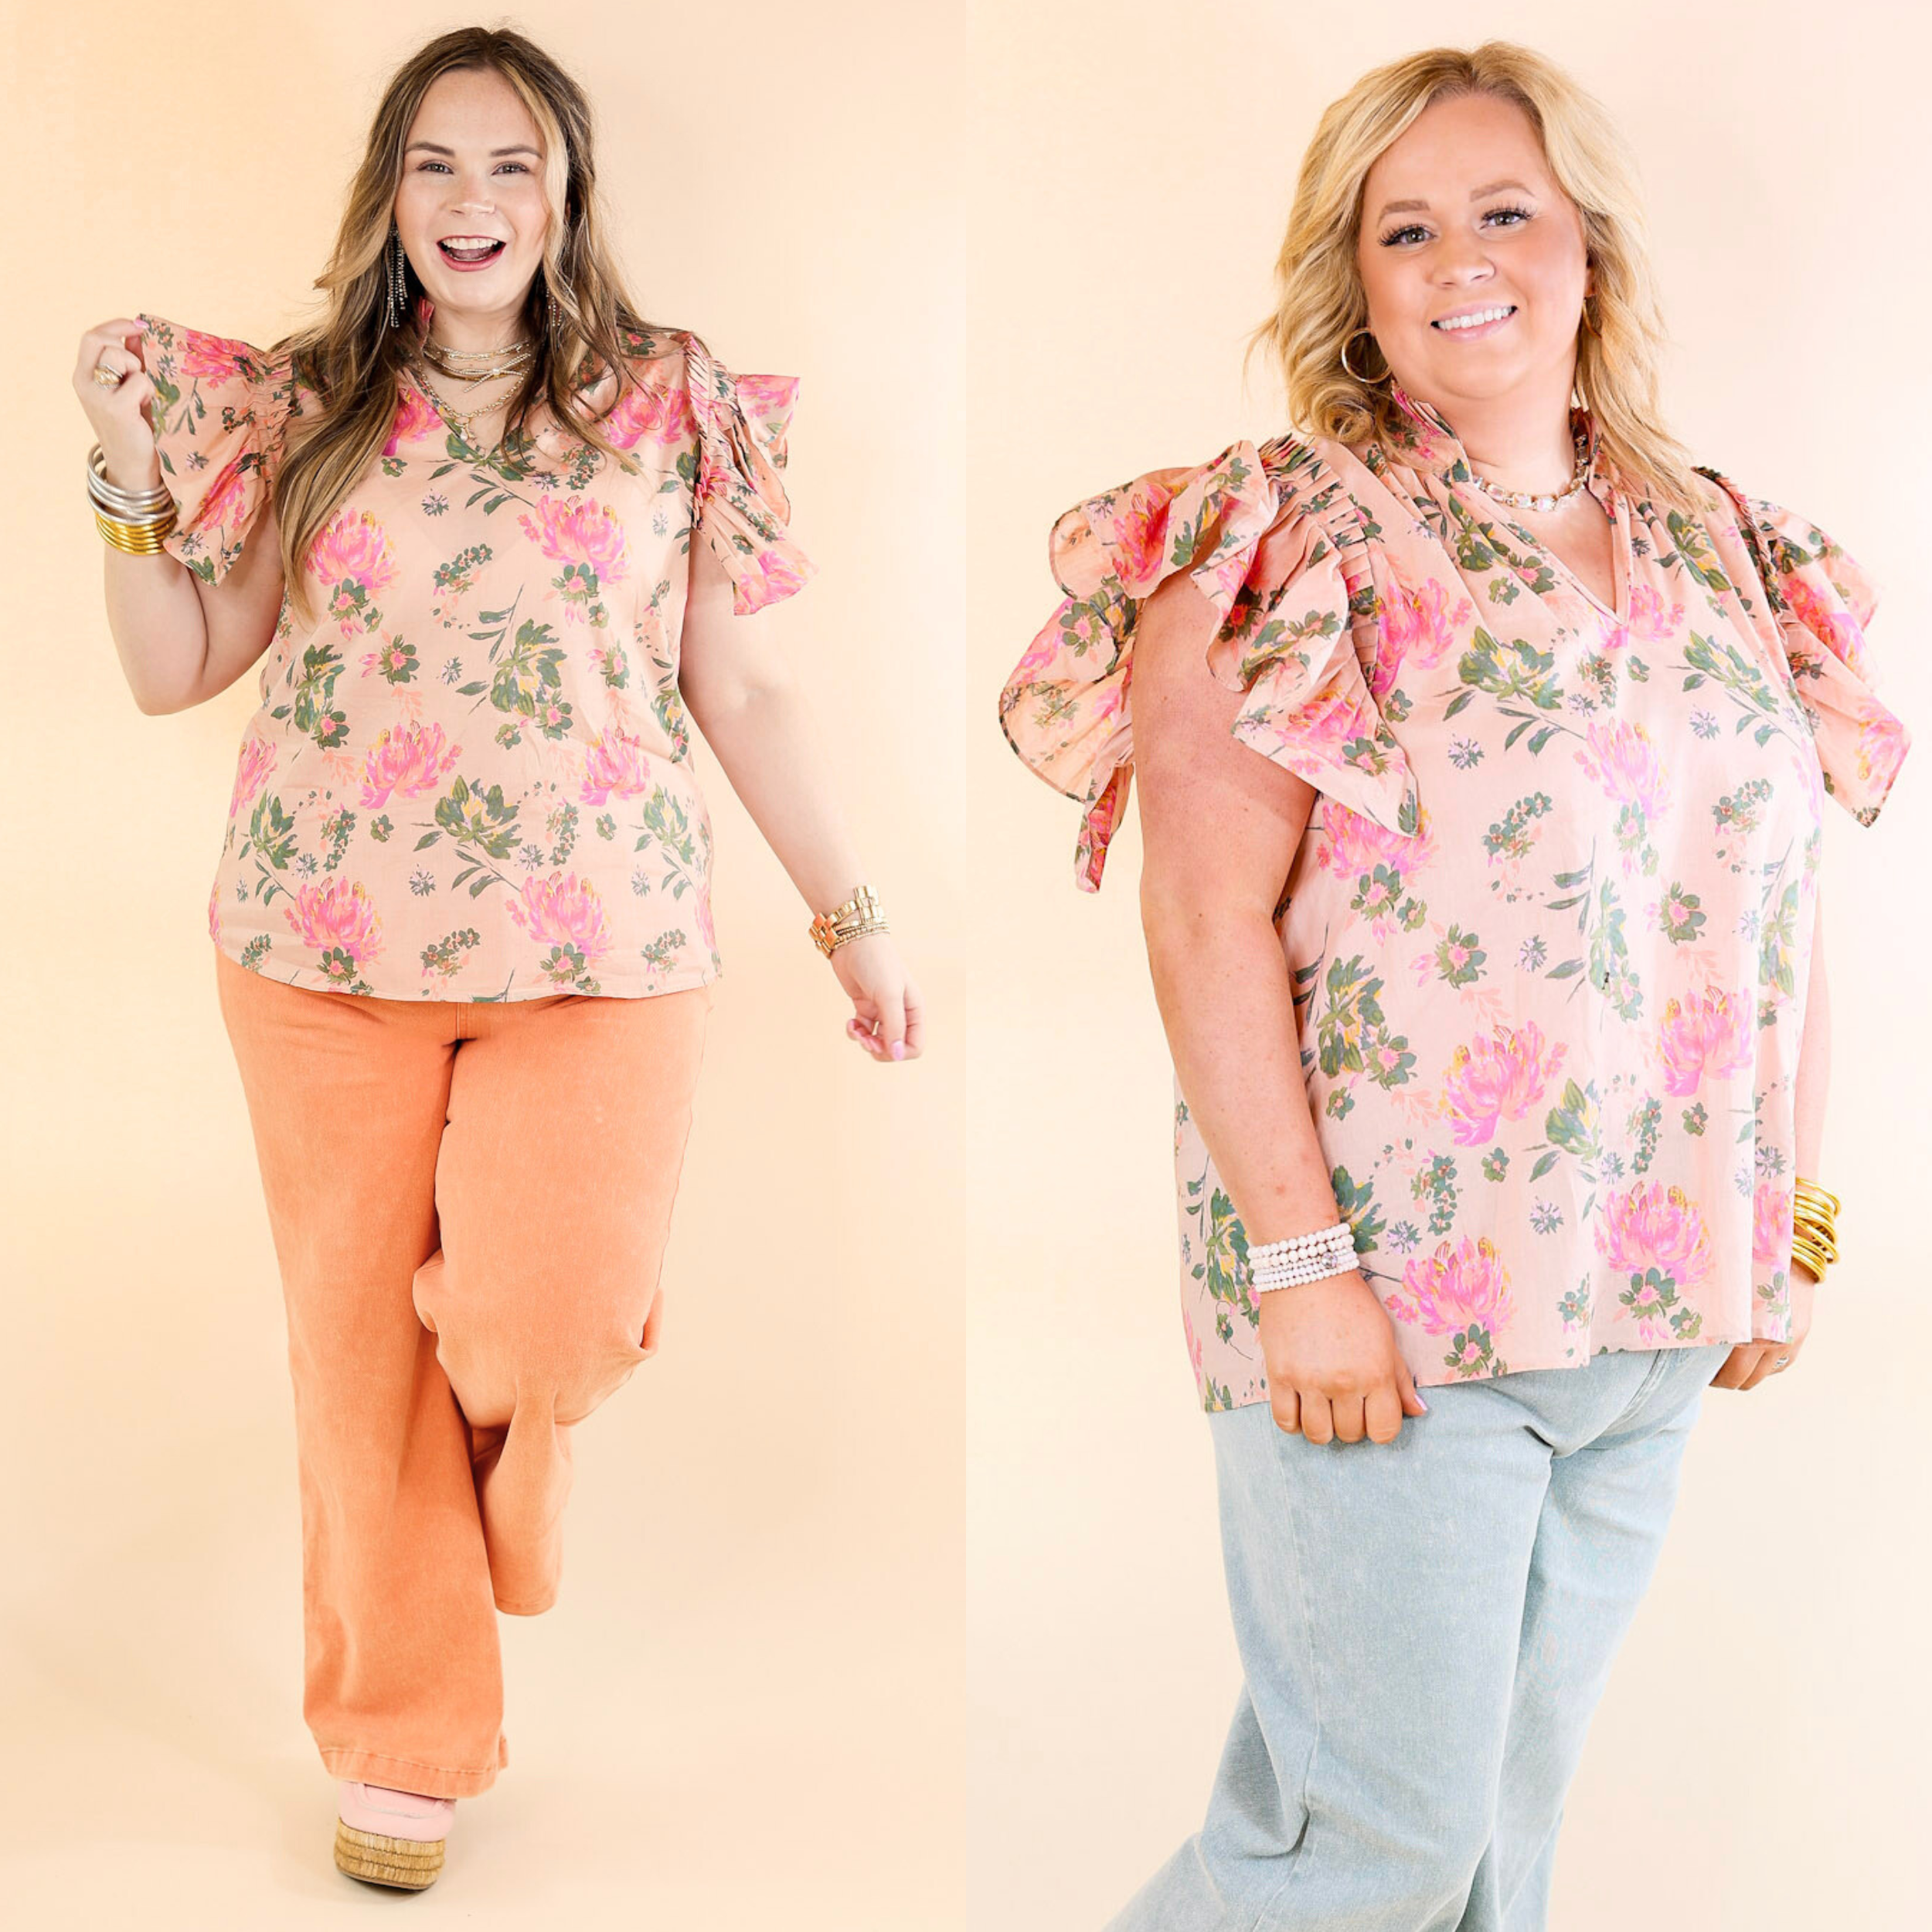 Blooming Chic Floral Print Top with Ruffle Cap Sleeves in Peach